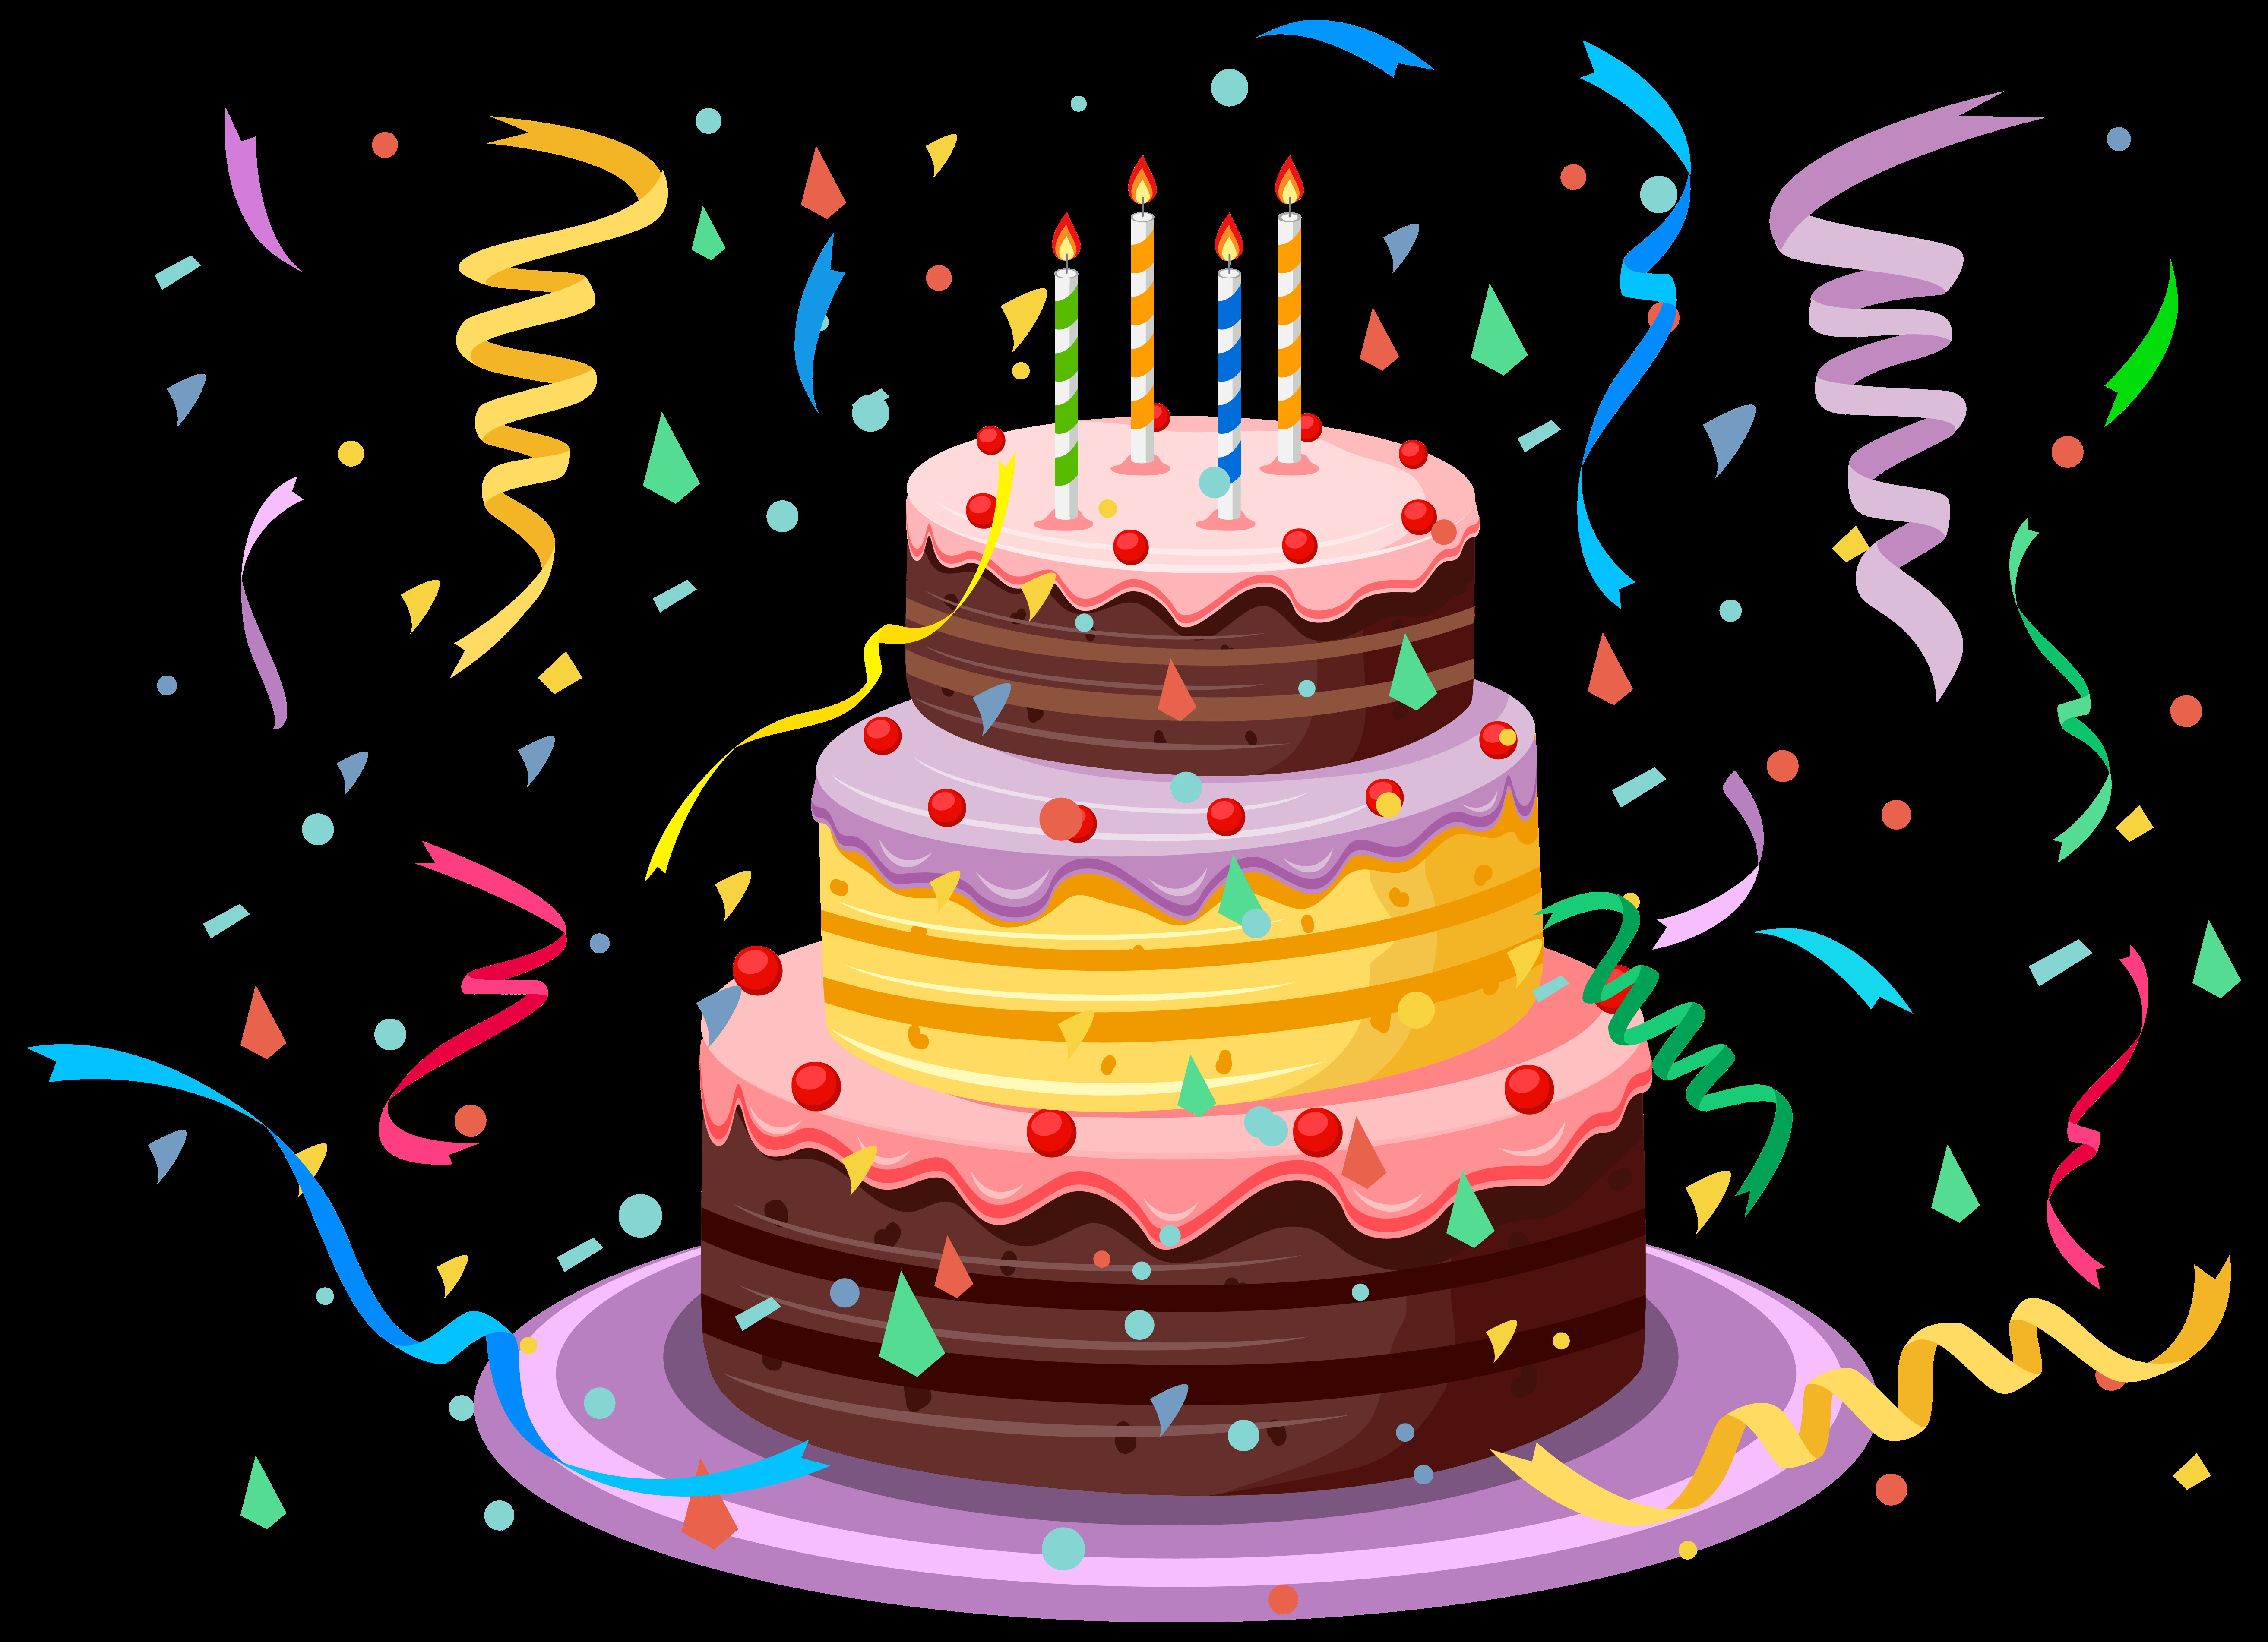 Best ideas about Birthday Cake Animated
. Save or Pin Birthday Cake Clip Art Free Animated Now.